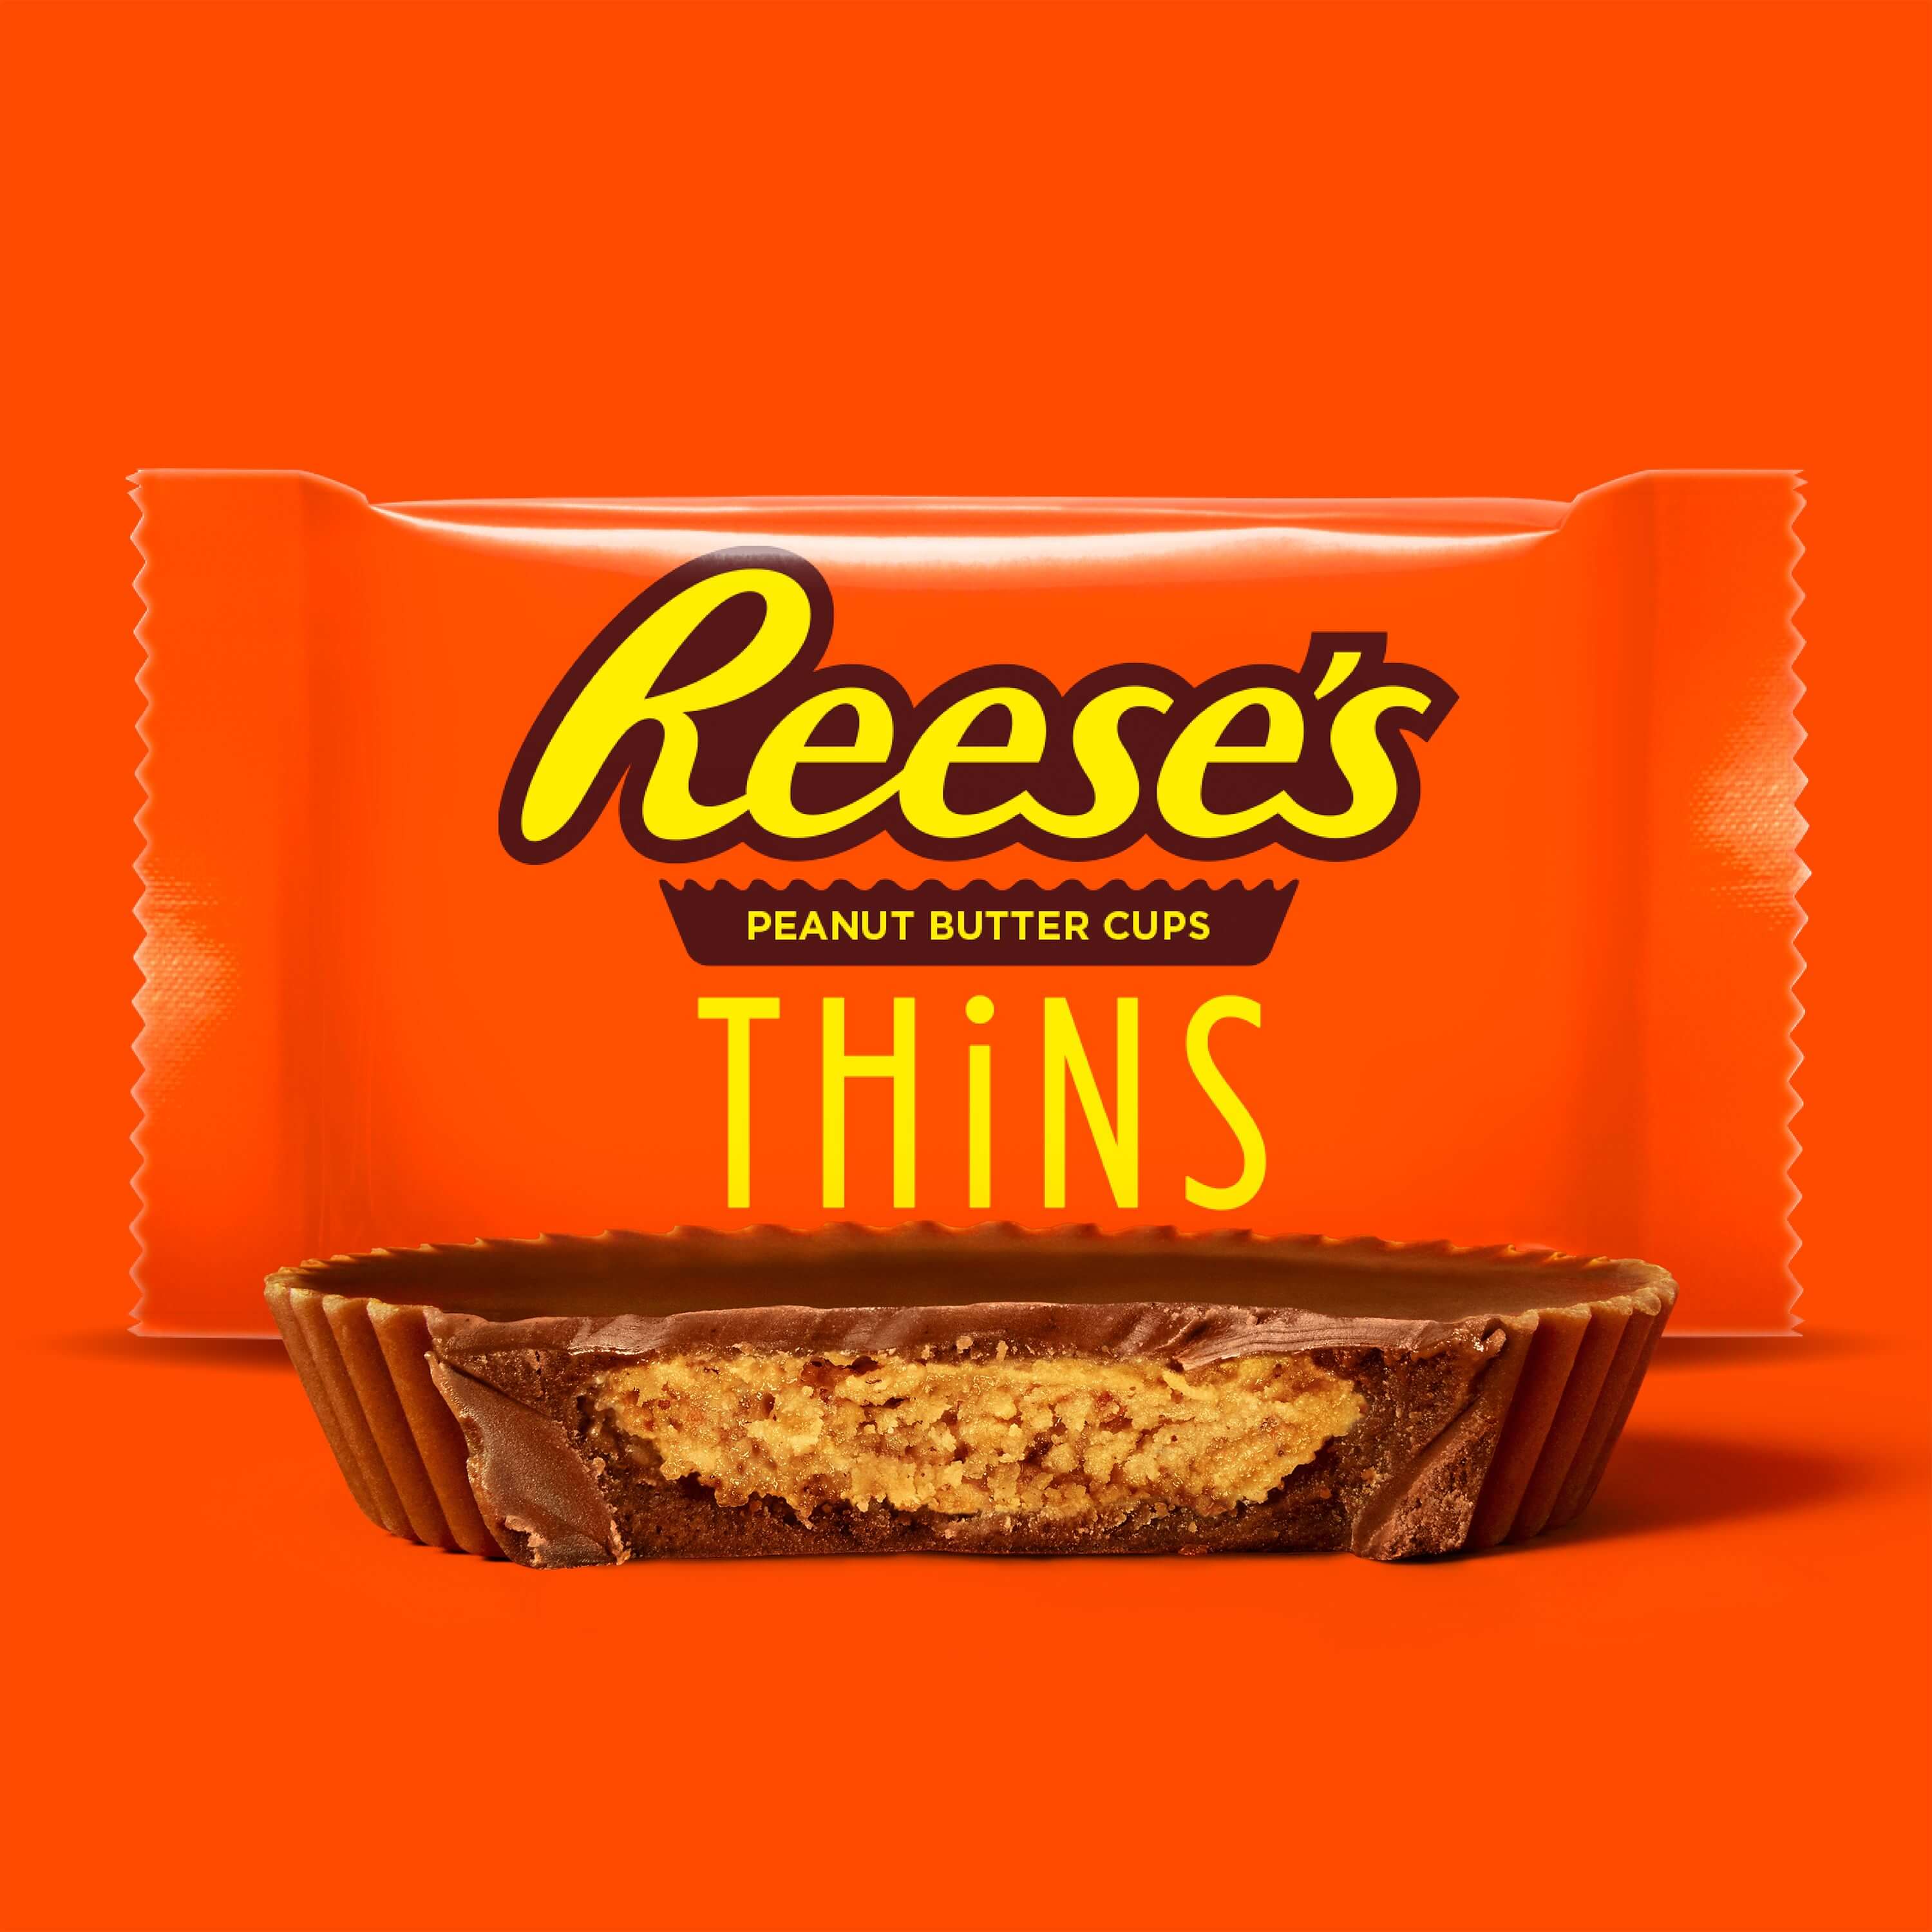 Reese's Thins Peanut Butter Cups